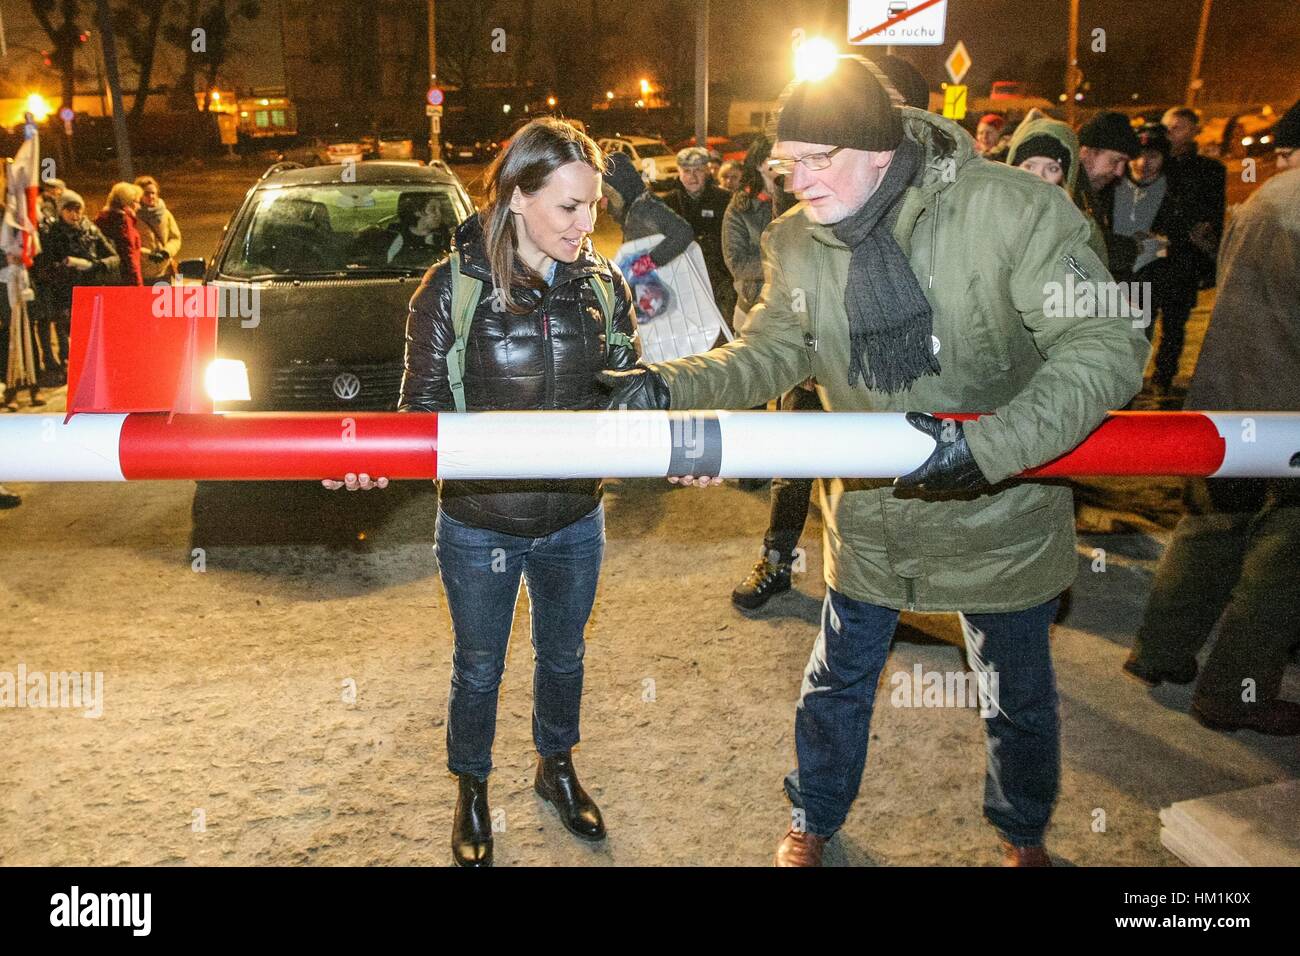 Gdansk, Poland. 31st Jan, 2017. Agnieszka Pomaska (L) Polish parliament member and Lech Kosiak (R) holding symbolic border barrier are seen outside the Second World War Museum on 31 January 2017 in Gdansk, Poland. Protest was organized by KOD movement against Poland's nationalist government plans to reshape the Museum's permanent exhibition into a display more focused on Poland's experience of the conflict. Museum is expected to open to the public on February 2017, is to place the war in broader international context. Credit: Michal Fludra/Alamy Live News Stock Photo